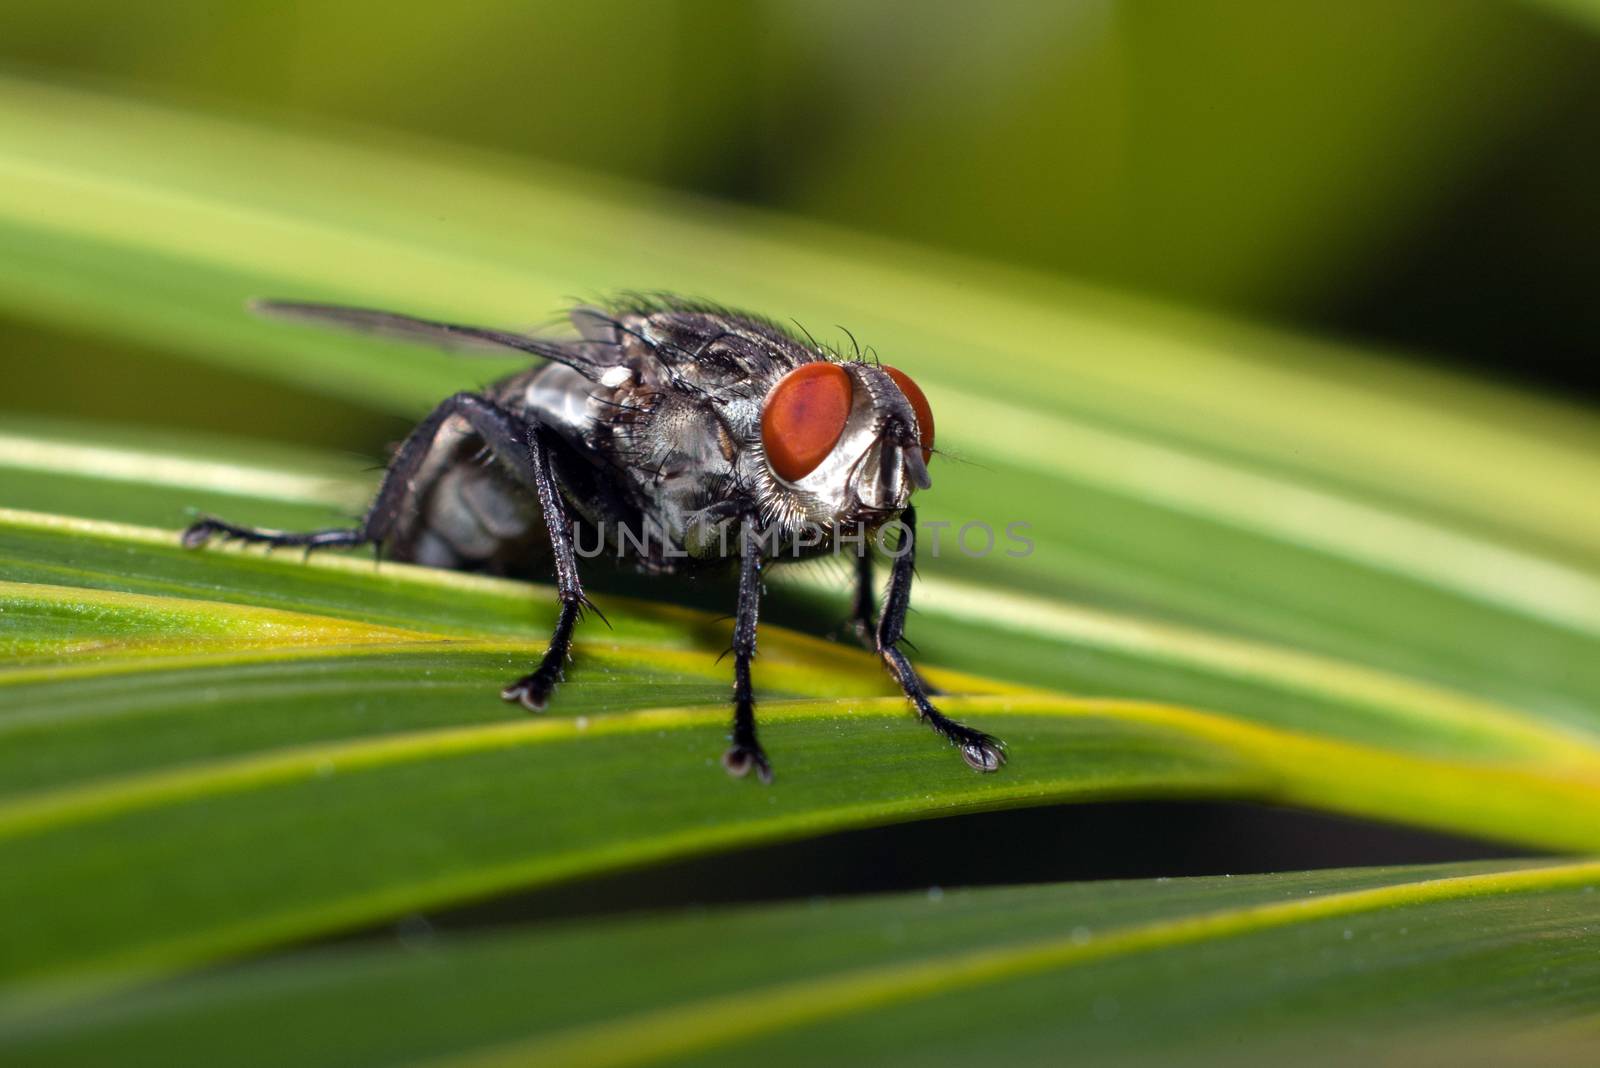 A fly standing on a leaf with green background